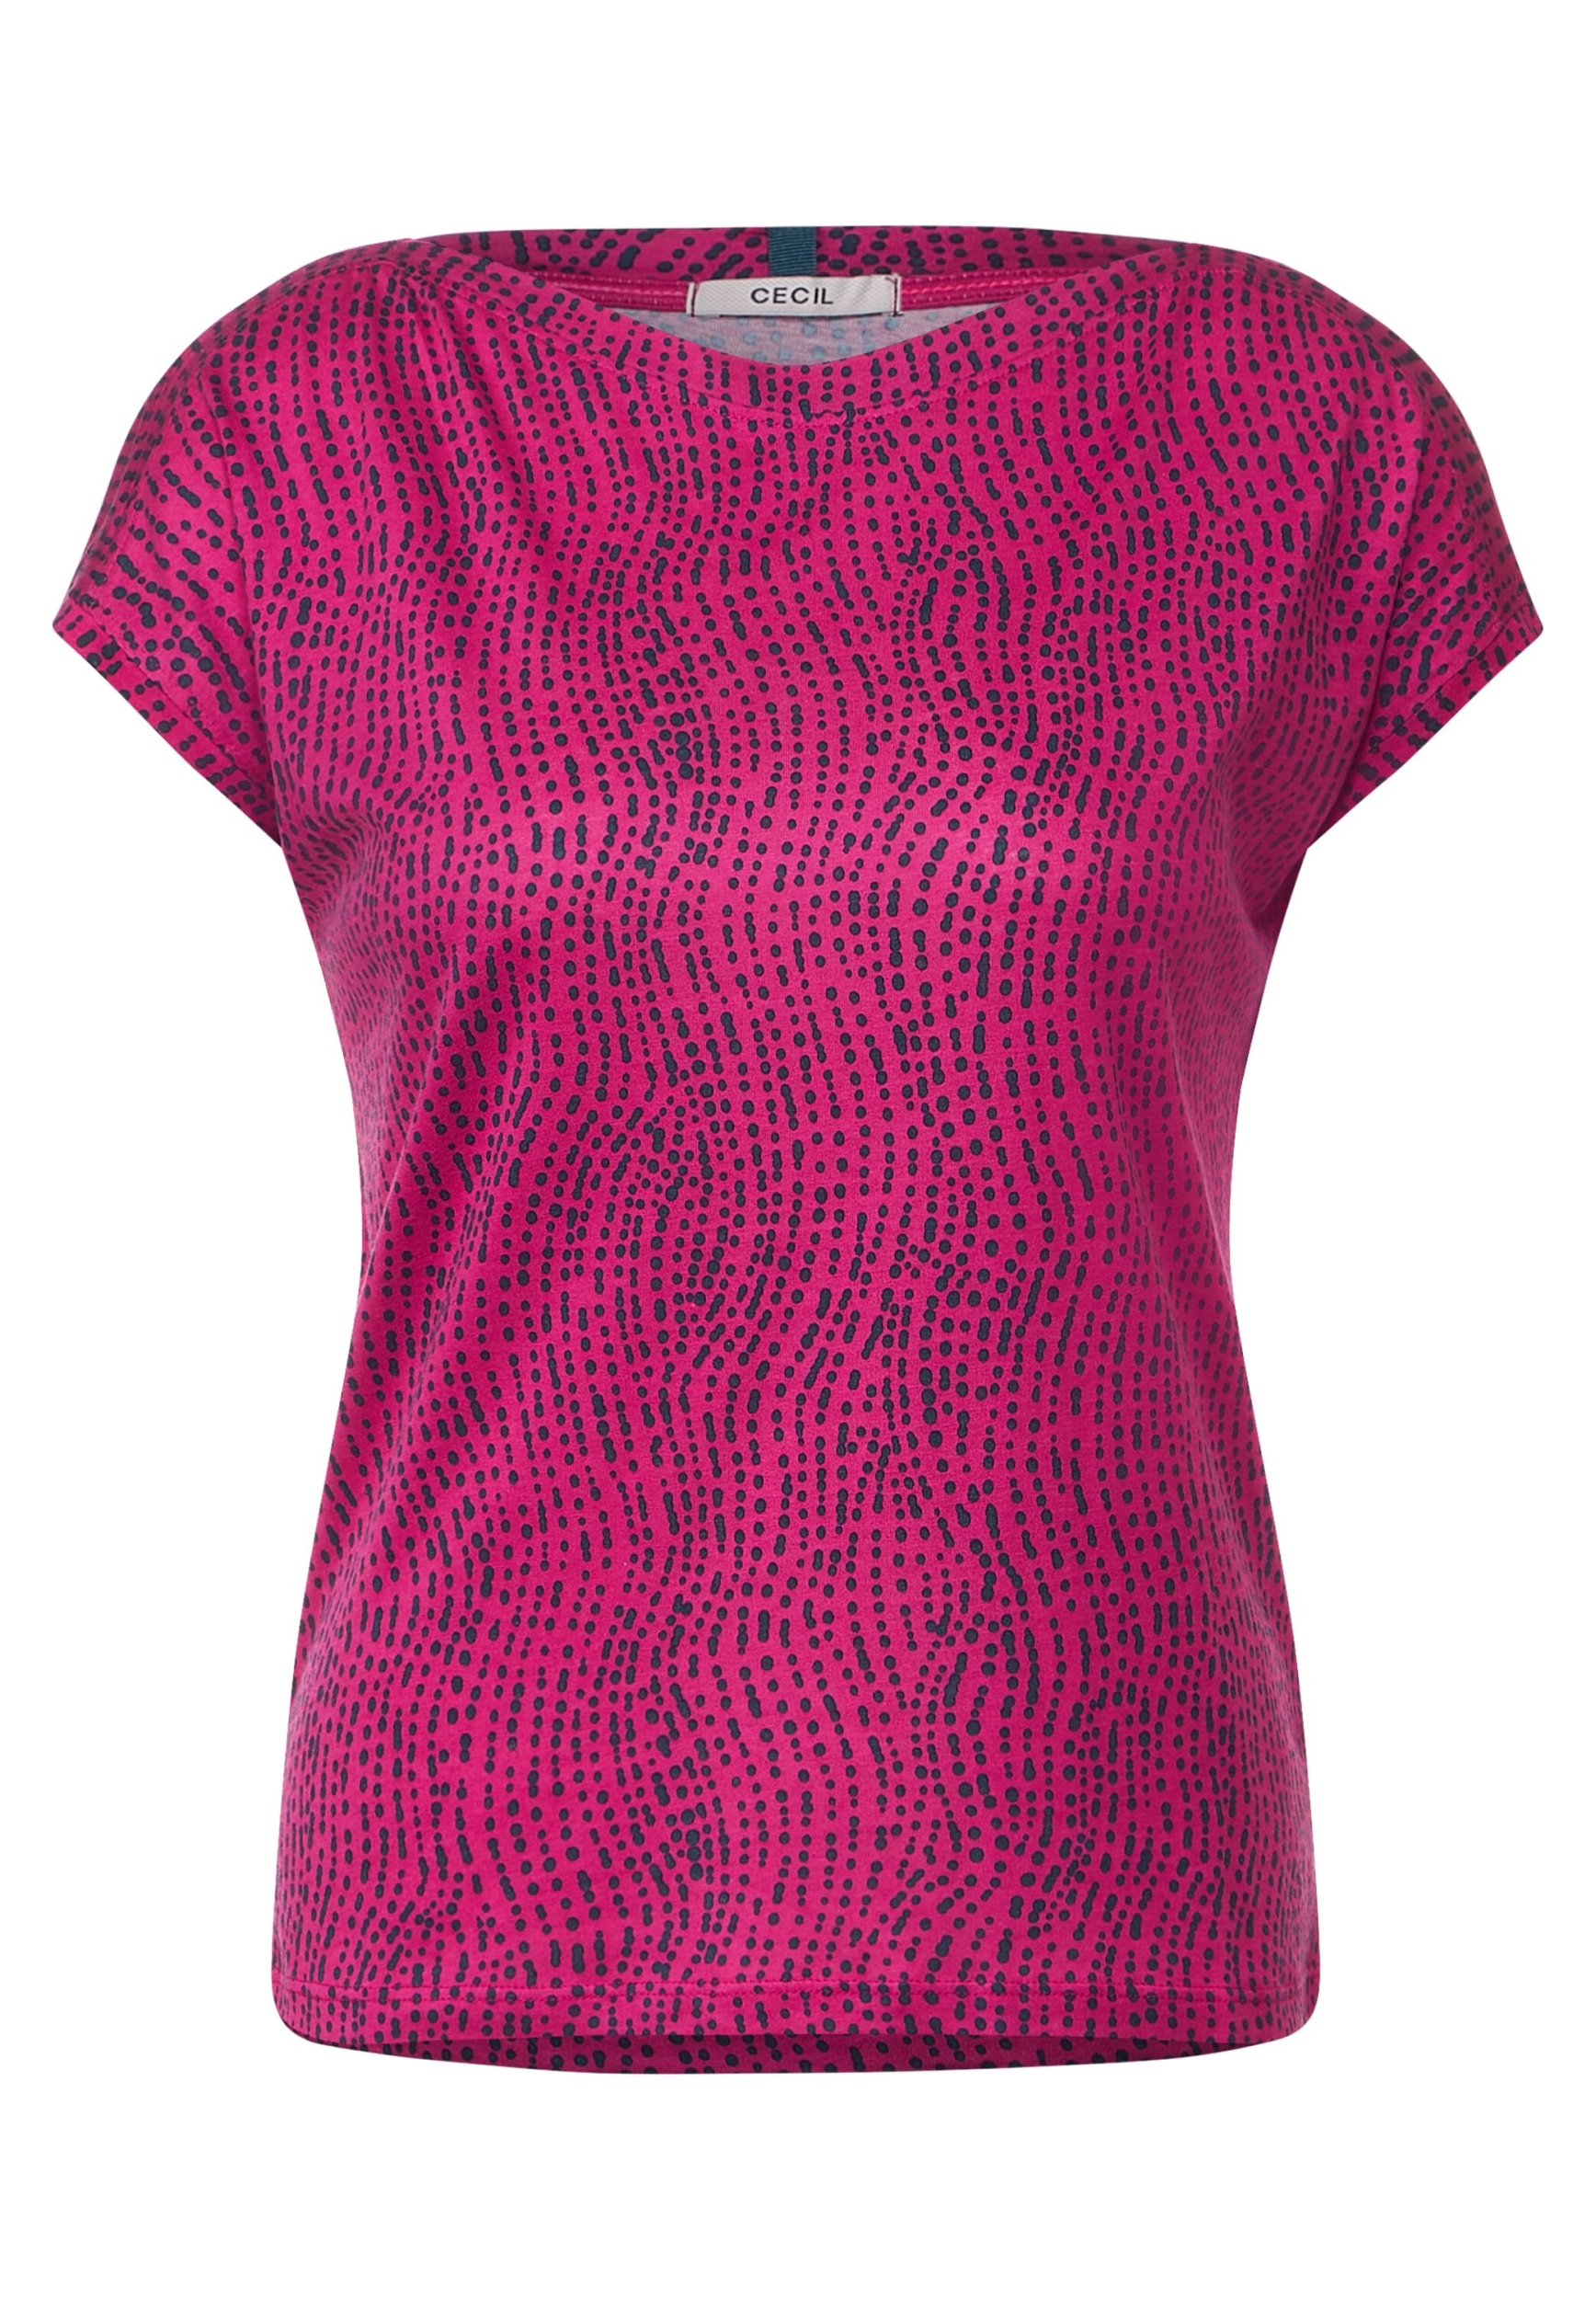 B320331-25095-S Weave | pink S | TOS cool T-Shirt | Dotted AOP